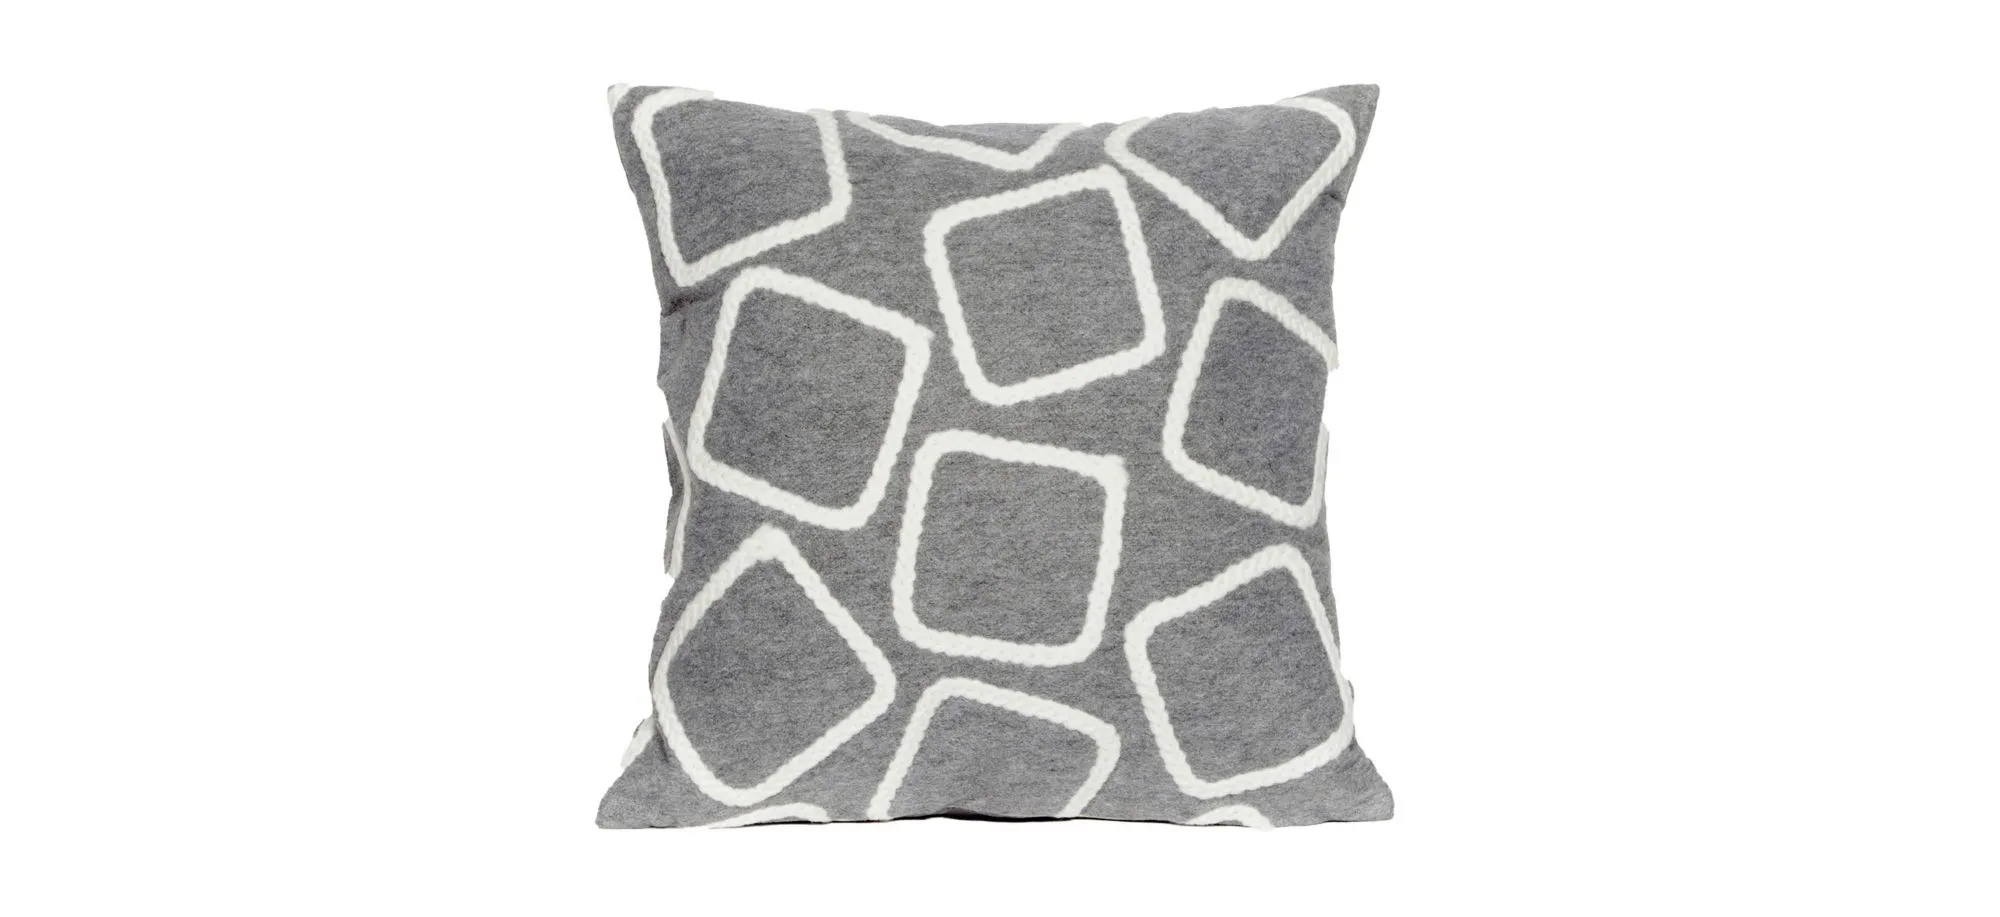 Liora Manne Visions I Squares Pillow in Silver by Trans-Ocean Import Co Inc